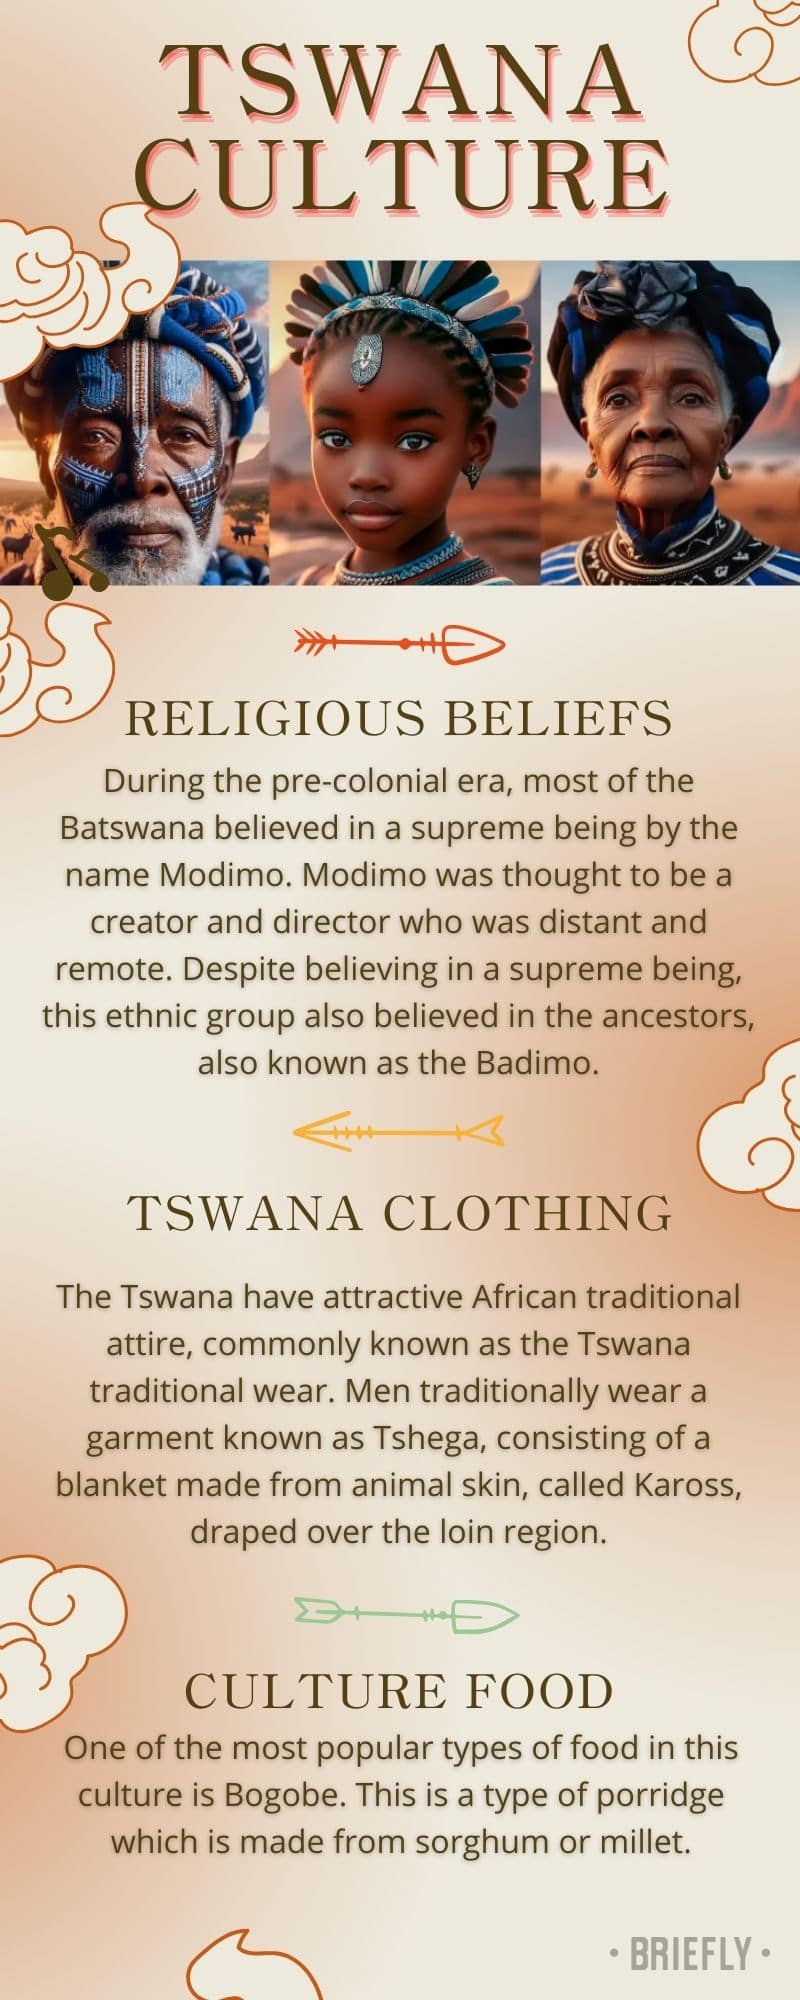 All about Tswana culture